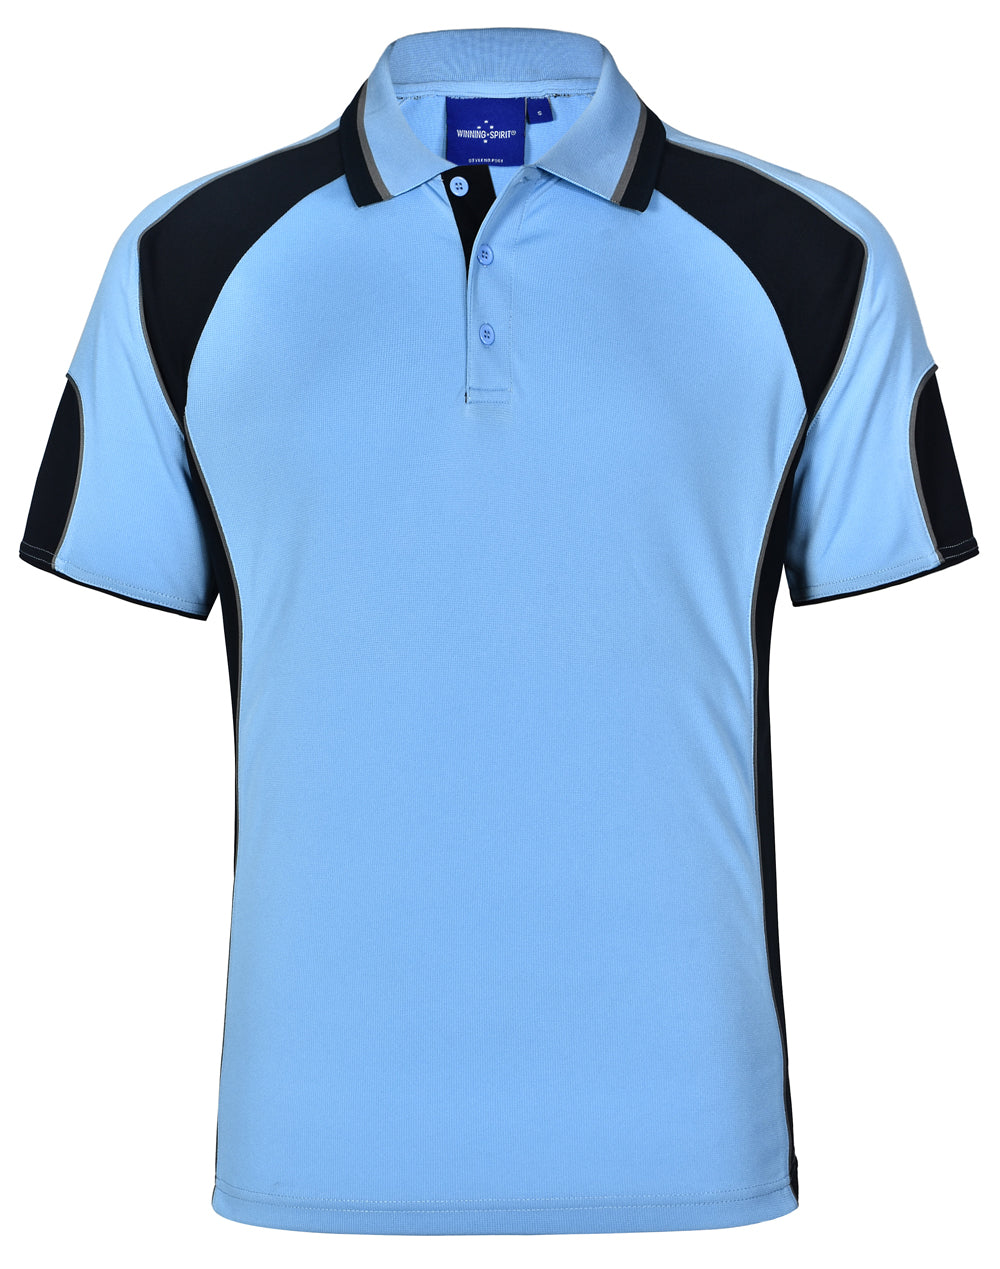 Winning Spirit Men's CoolDry® Contrast Polo with Sleeve Panels 2nd (7 Colour)-(PS61)